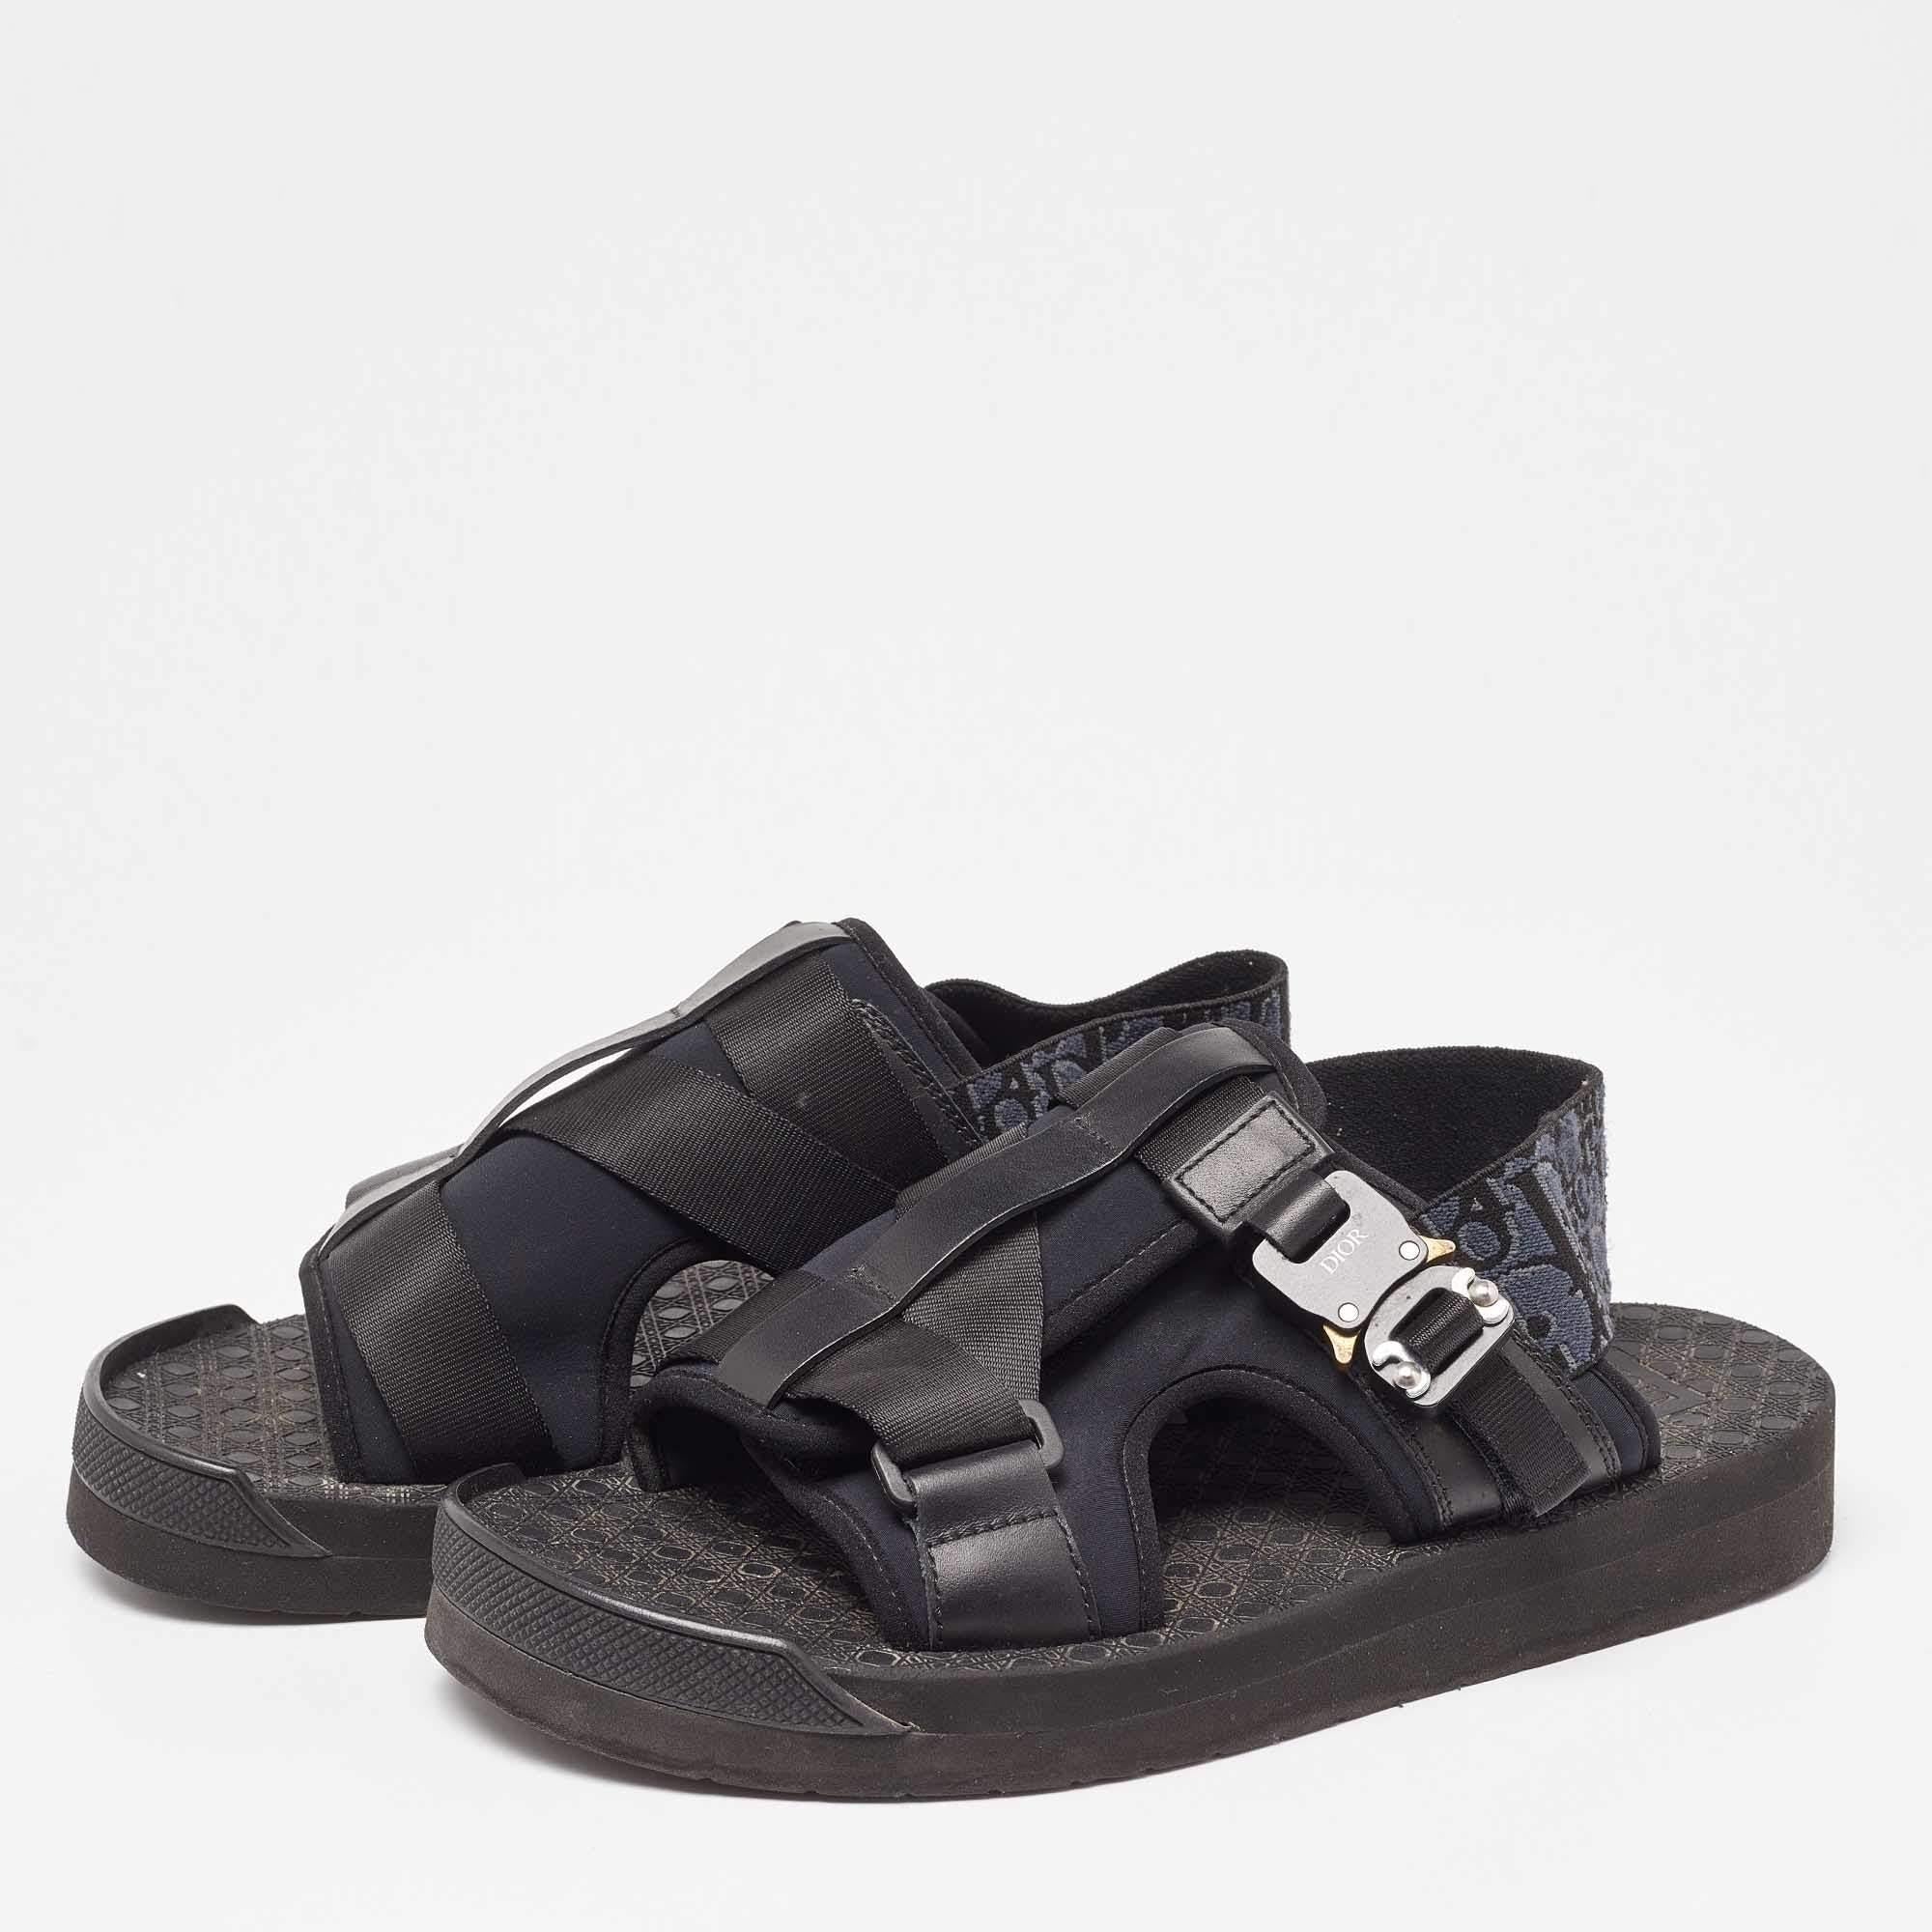 These sandals will offer you both luxury and comfort. Made from quality materials, they come in a versatile shade and are equipped with comfortable insoles.

Includes: Original Dustbag